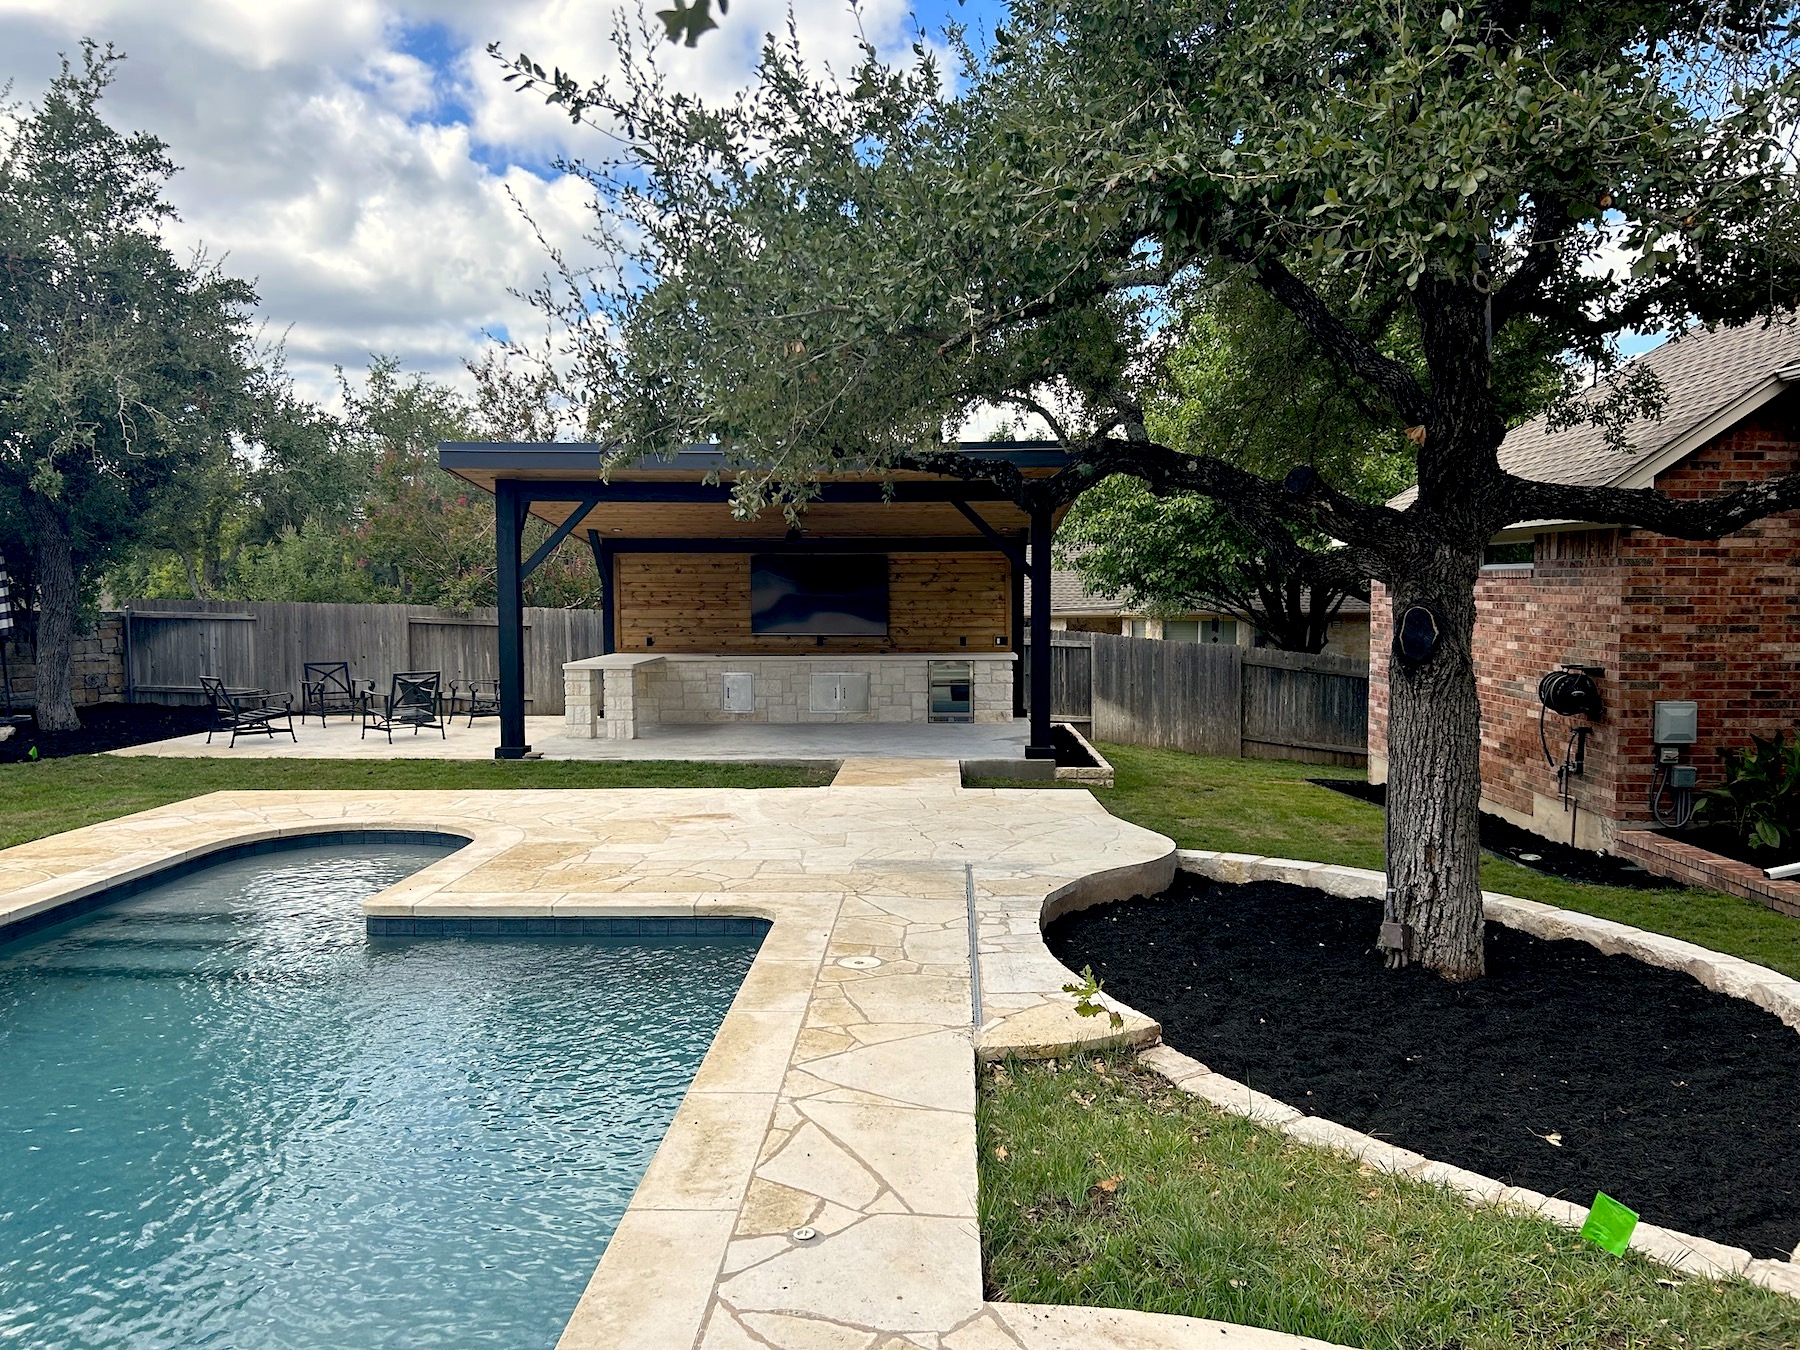 backyard outdoor living space overlooking pool with shade cover, outdoor kitchen, bar top, and raised plant beds